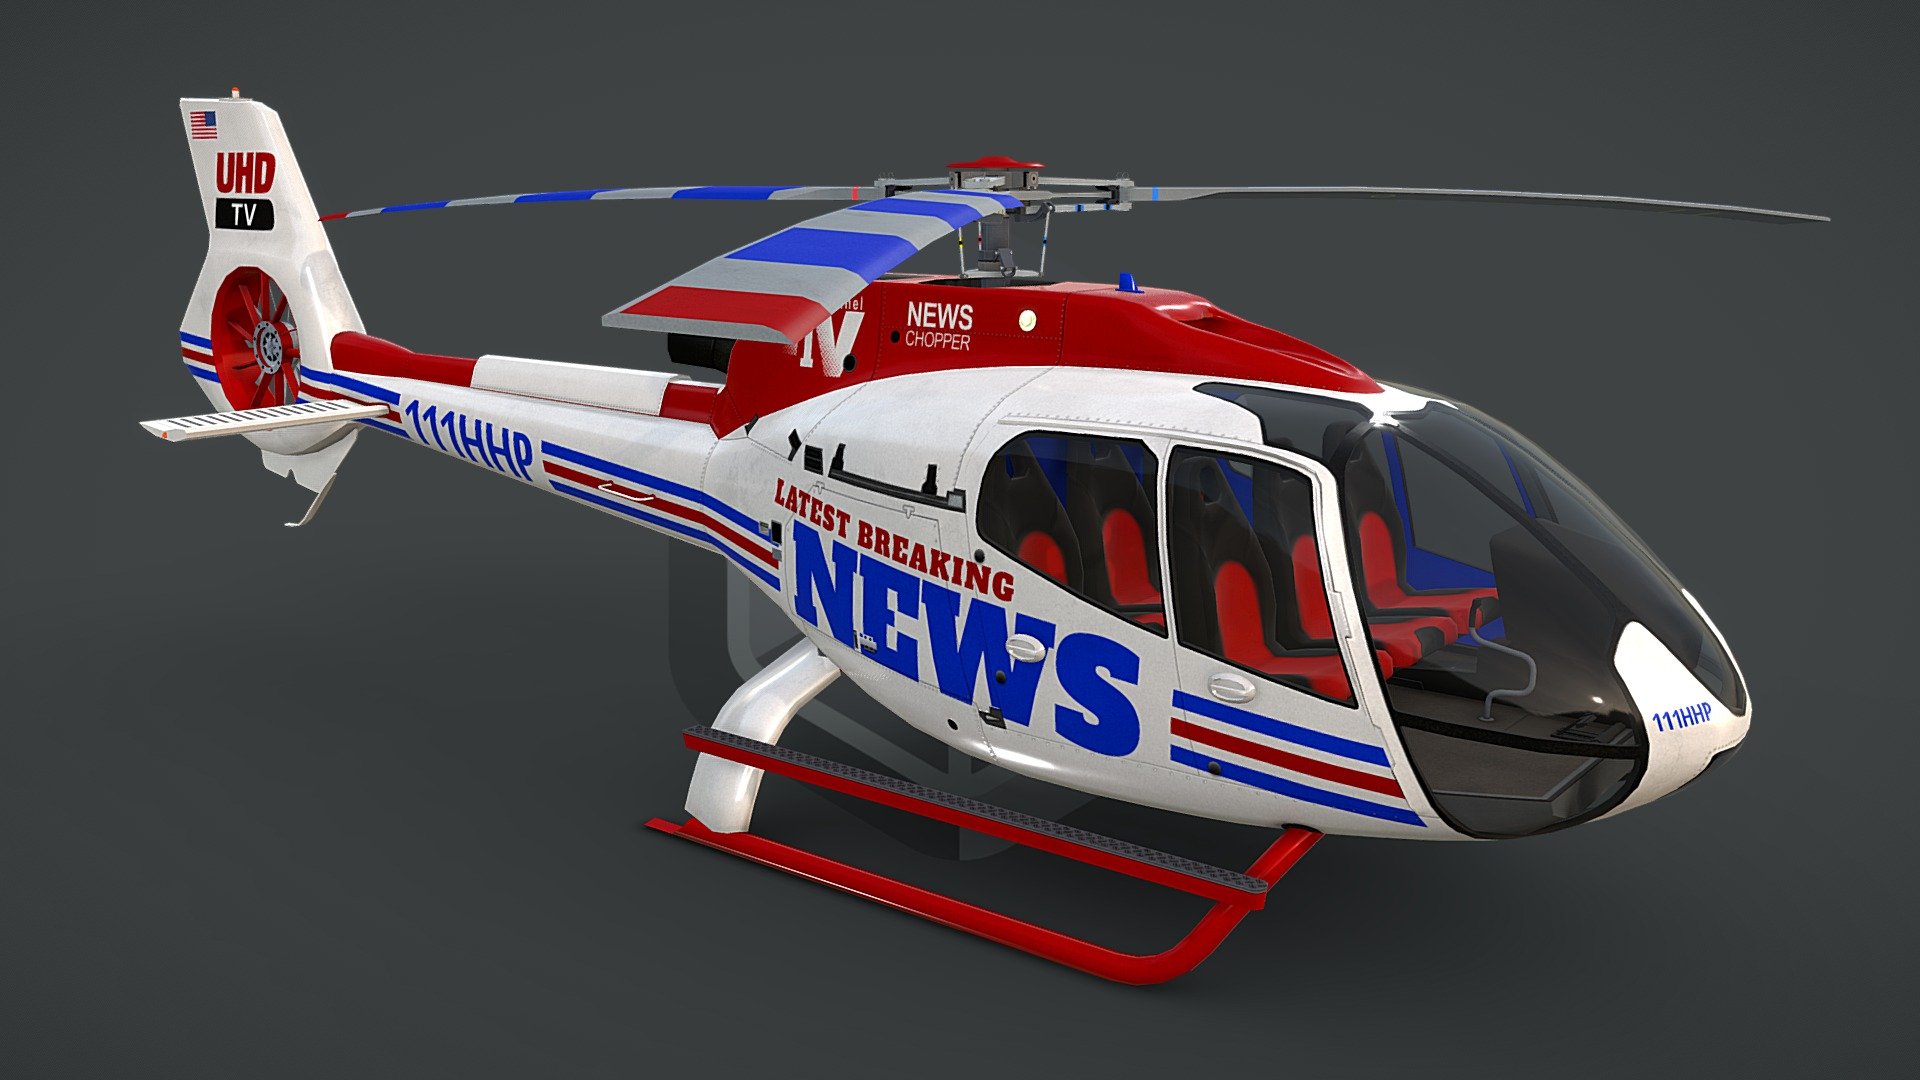 game ready, realtime optimized game asset

unique livery and branding

both PBR workflows ready

LOD0 is HQ lowpoly with bended top rotor, all lights objects and interior

LOD0 19710 tris, LOD1 10462 tris, LOD2 7388 tris, LOD3 5990 tris

100% triangulated and 100% unwrapped non-overlapping

5 x uv layouts, body, HQ rotors, LQ rotors, interior, lights

made using blueprints, real world scale meters

all rotors detached and animable in each LOD with properly placed pivots for flawless animations

hideable capsule built interior that fits perfectly the body

interior is simple but a great basis for further elaboration

big textures pack with native 4096 x 4096 px textures for body, rotors, interior

LOD3 rotors have own textures with blades on alpha channel

light objects have own, small, textures, and contain an emission map

pack contains native .max scene, created in 3dsmax 2014

pack contains clean and flawless FBX and OBJ files

each LOD and all LOD together exported in each file format
 - News Helicopter EC130-H130 Livery 24 - Buy Royalty Free 3D model by CGAmp 3d model